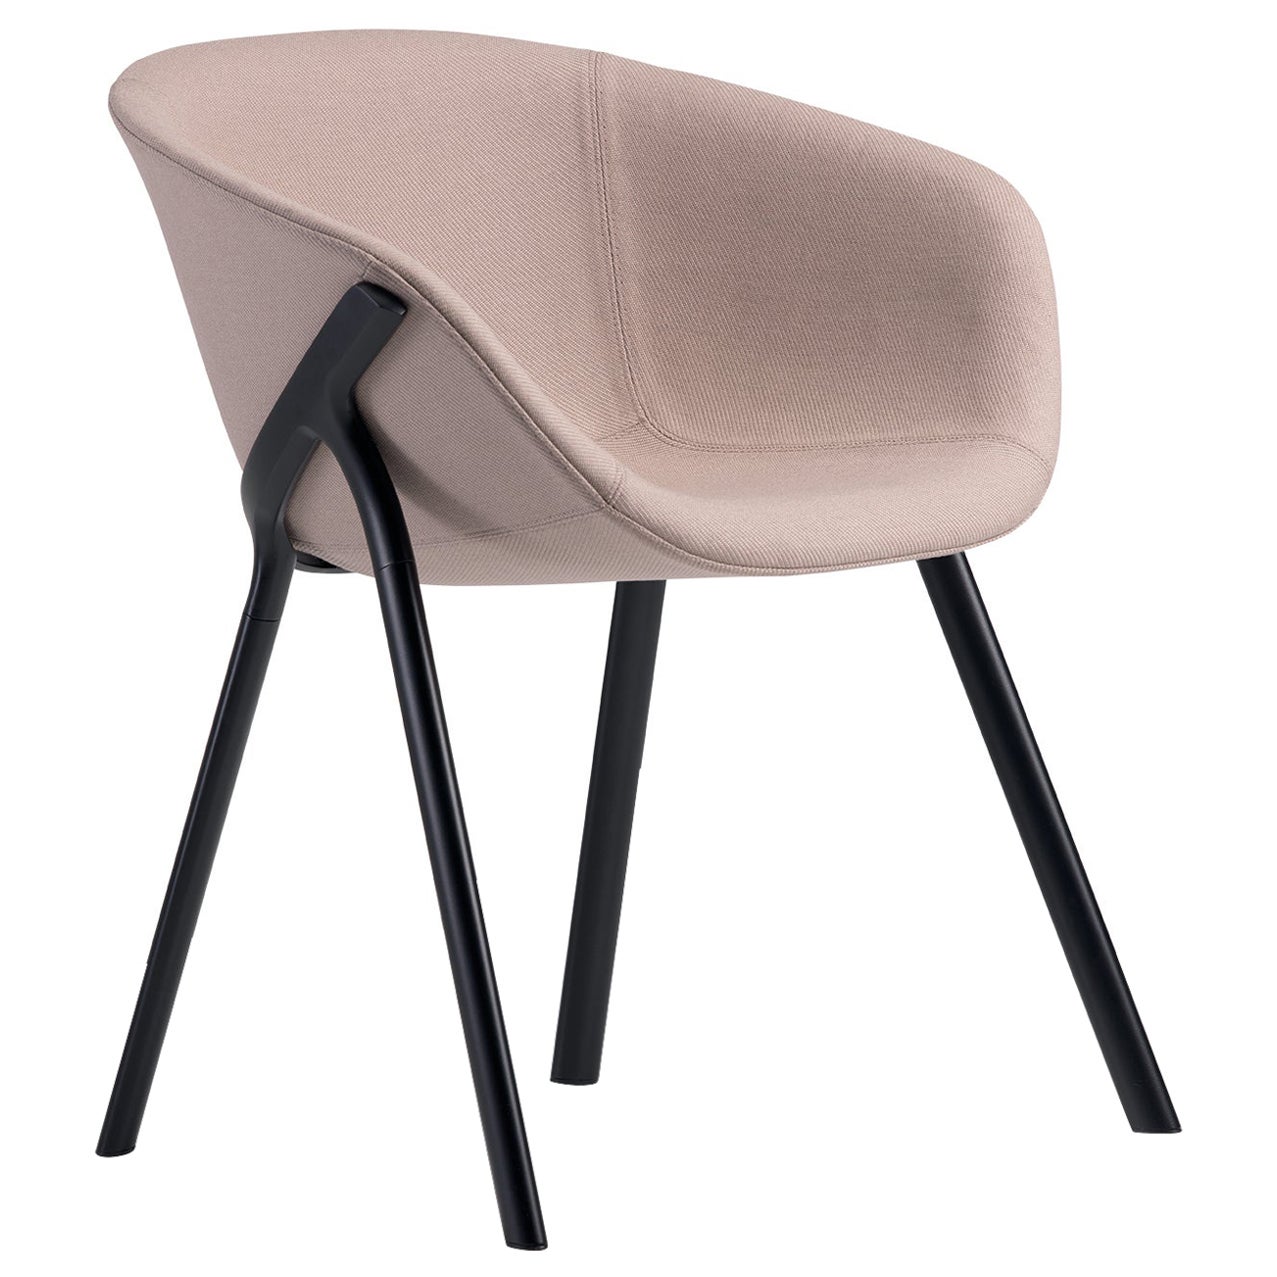 Alias 03A Kobi Soft Chair in Brown Upholstery Seat with Black Lacquered Frame For Sale